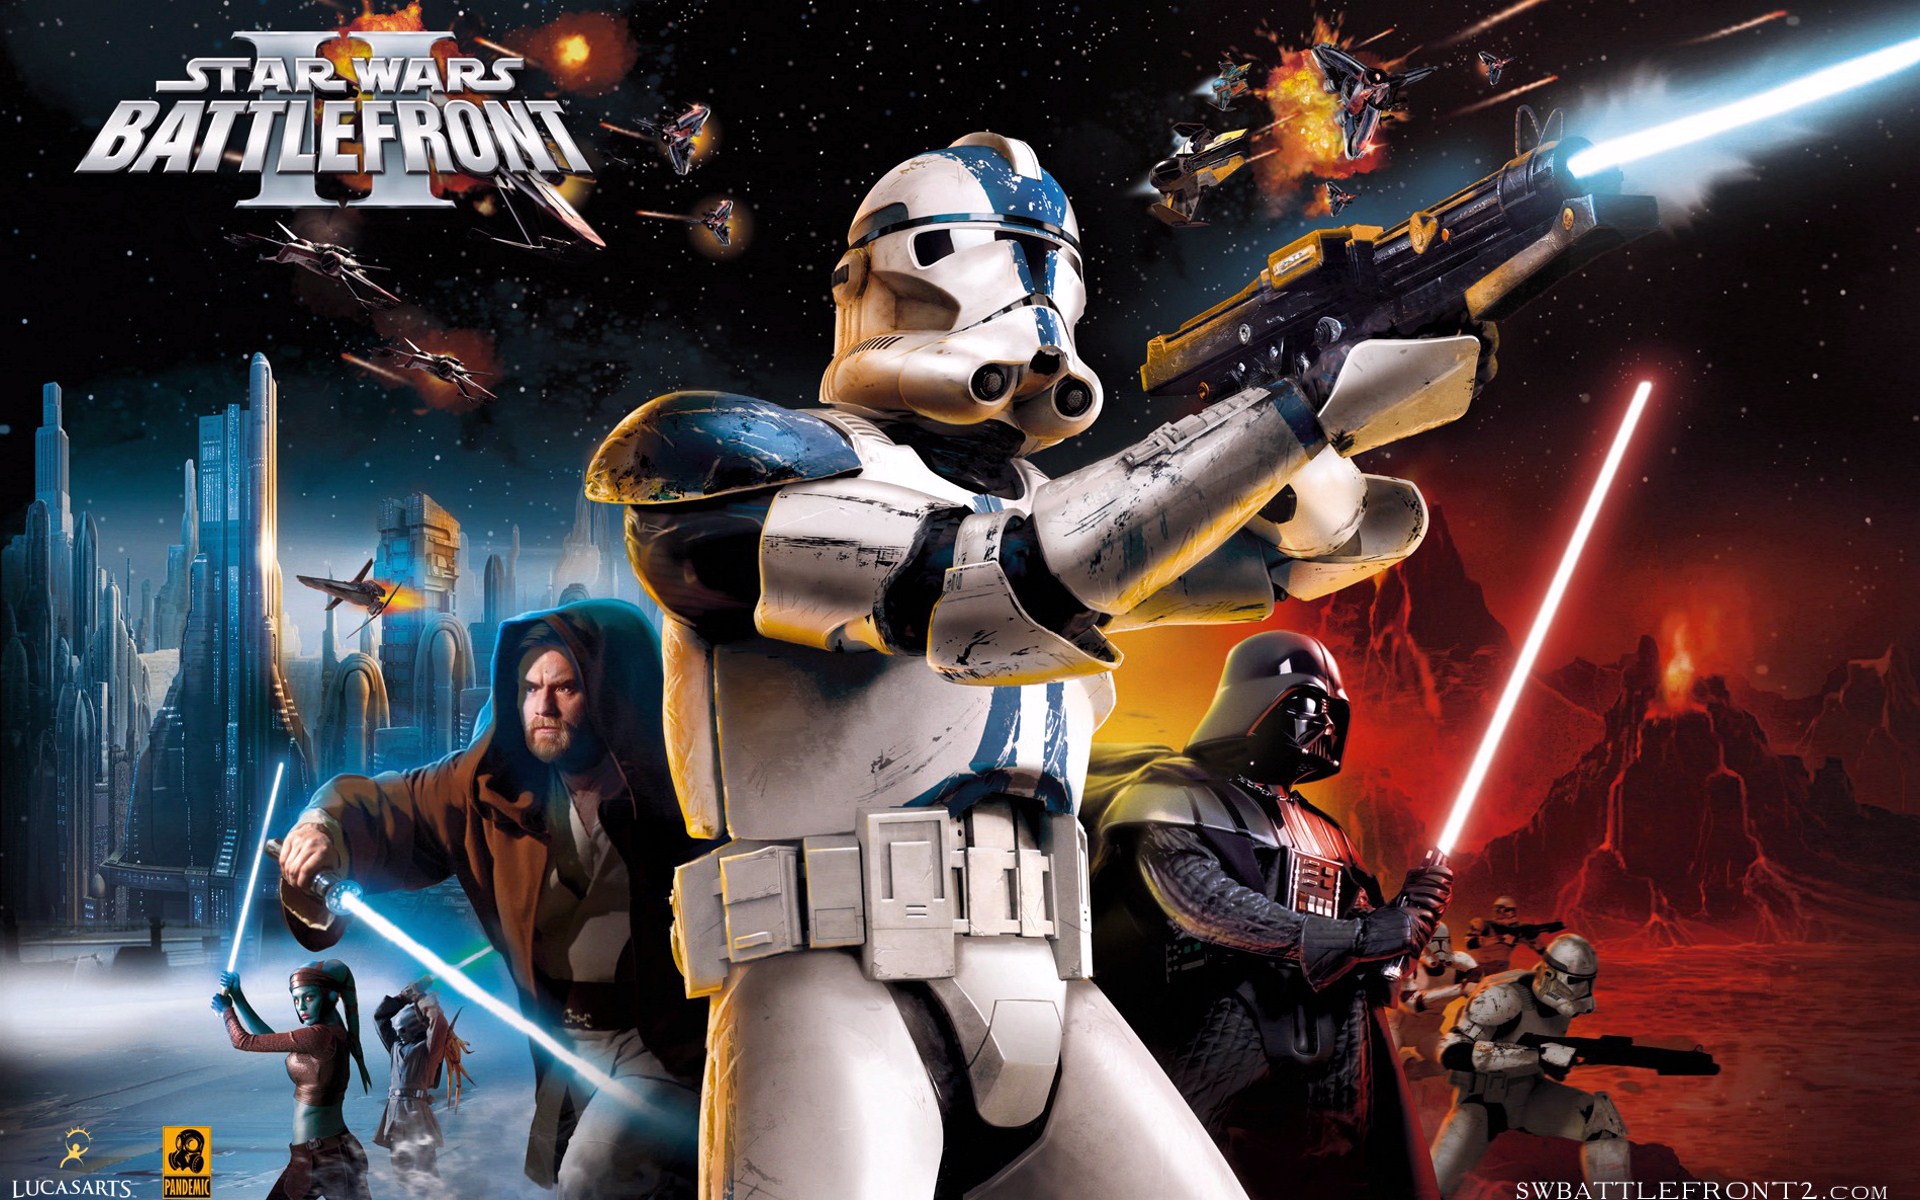 Star wars battlefront classic collection купить. Star Wars Battlefront 2 2005 диск. Стар ВАРС игра. Star Wars 2 игра. Star Wars: Battlefront 2 (Classic, 2005).